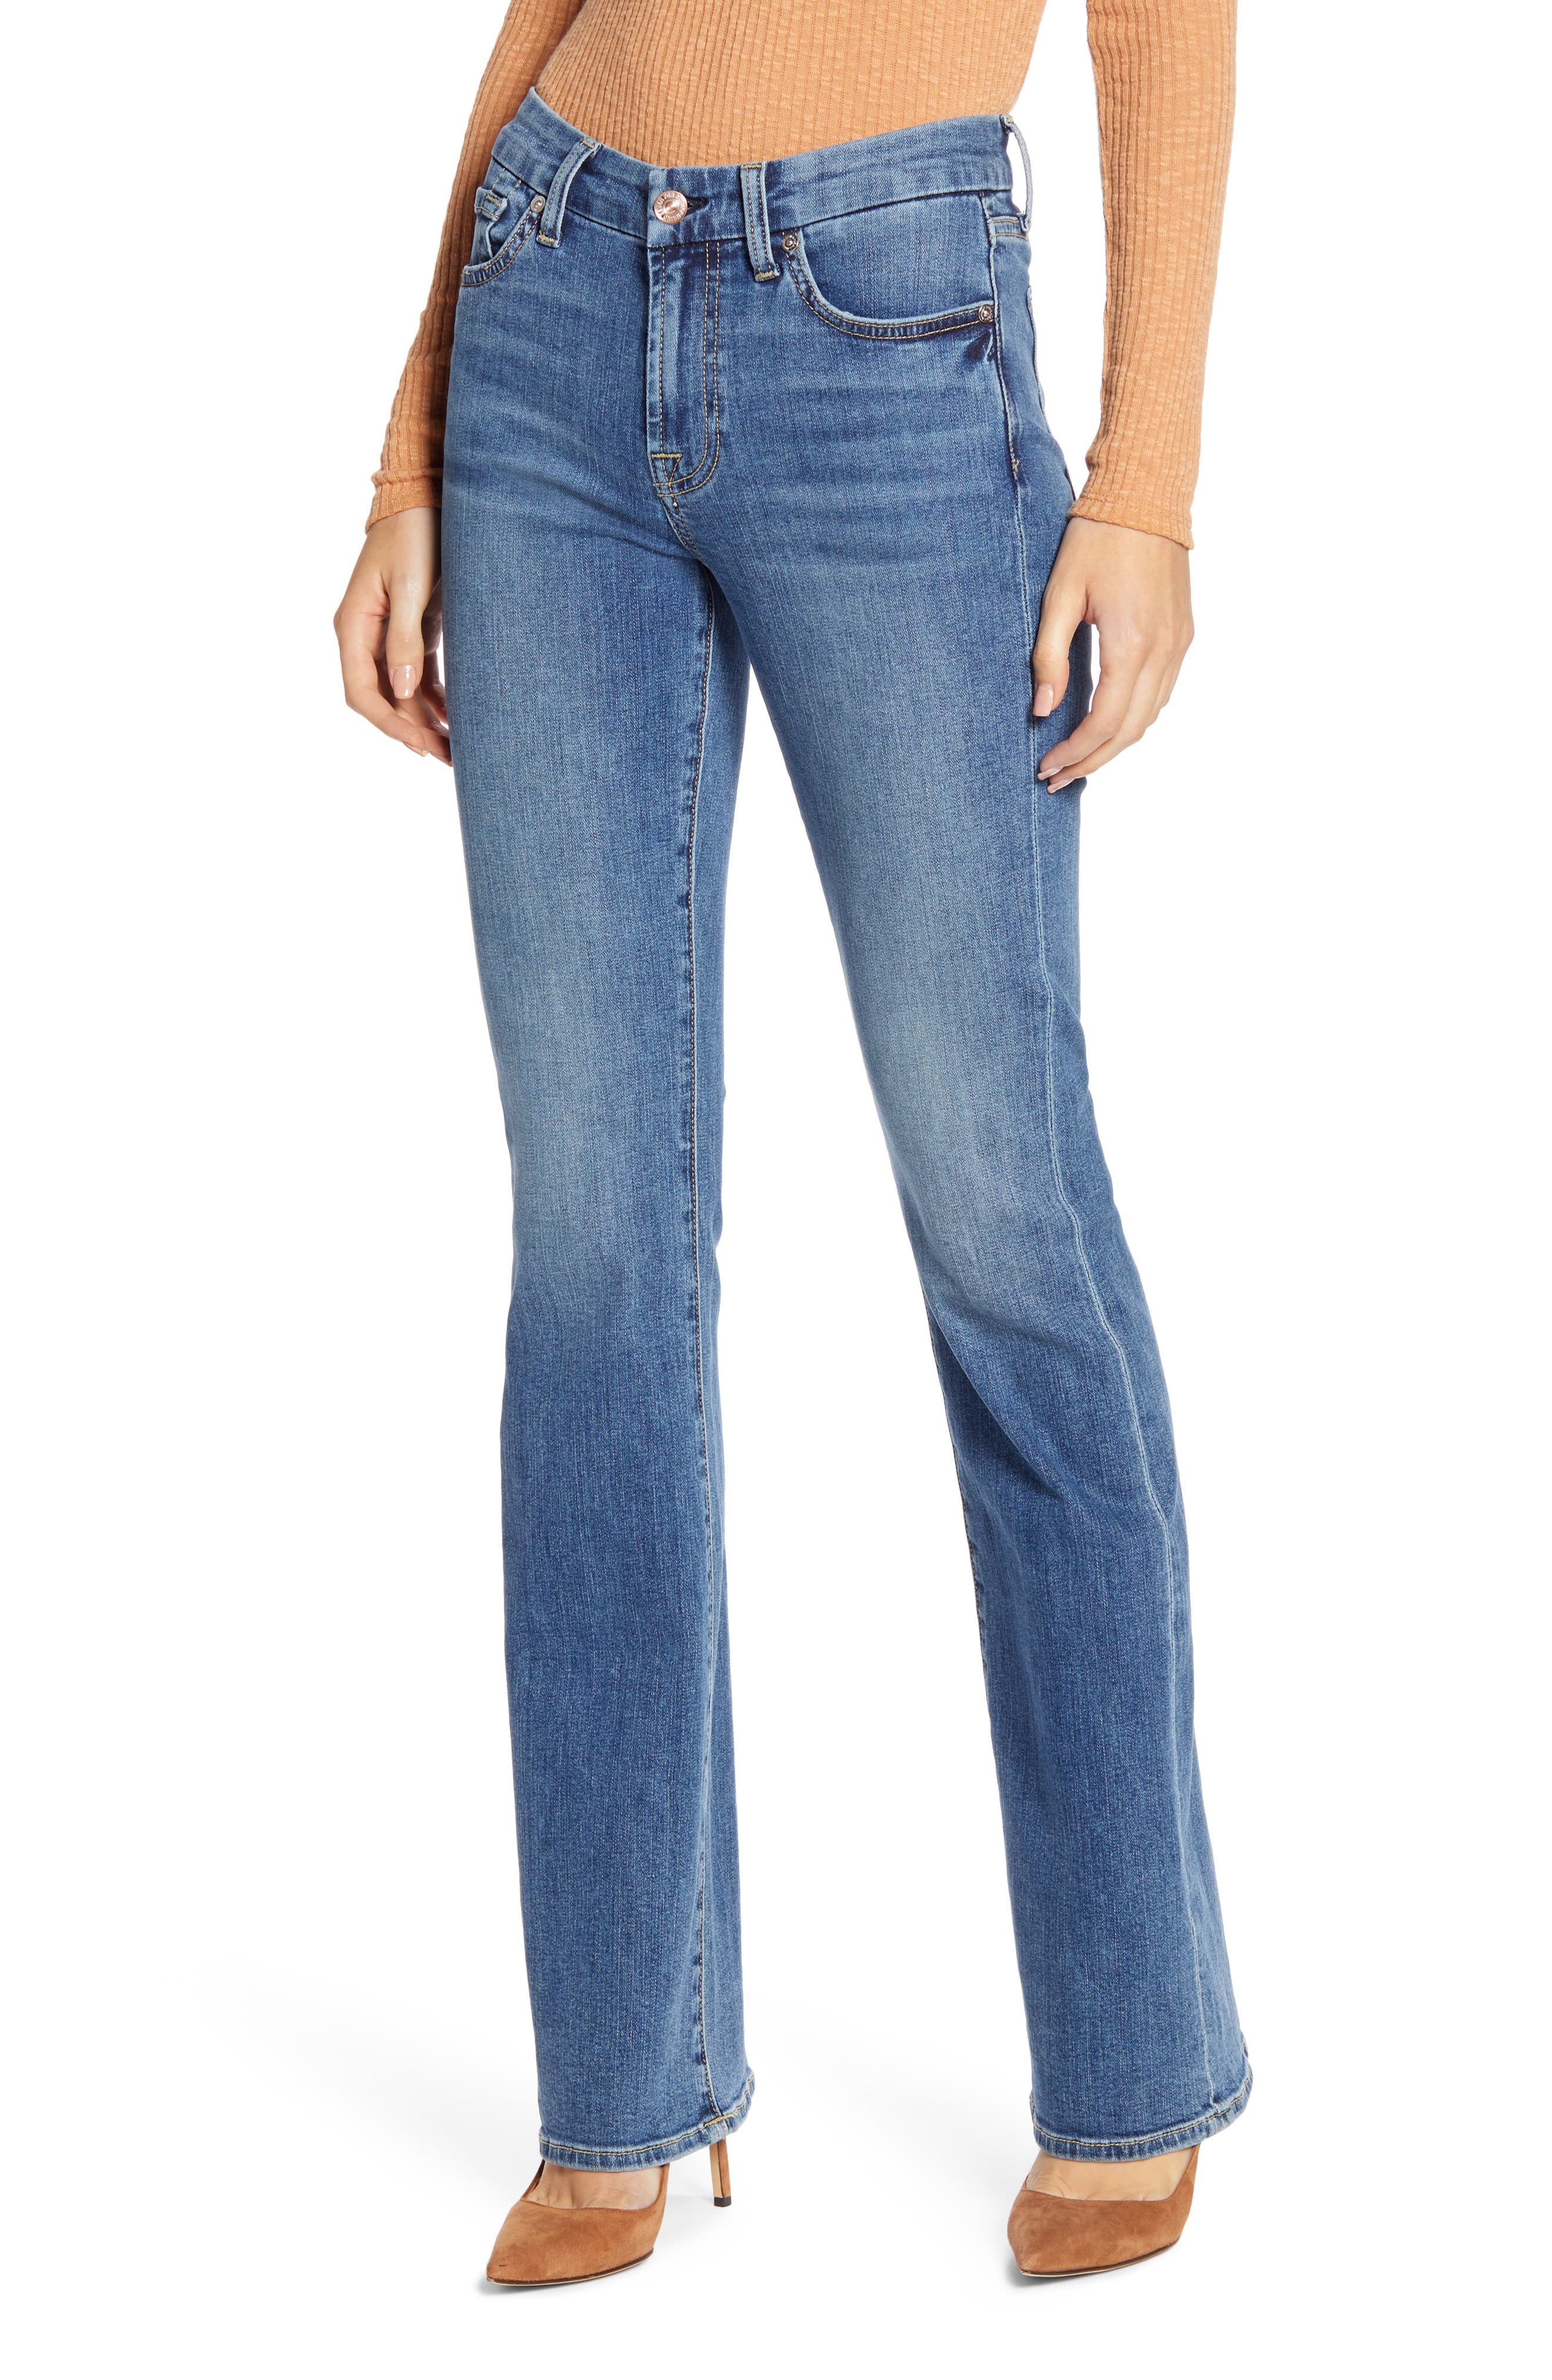 7 for all mankind kimmie jeans